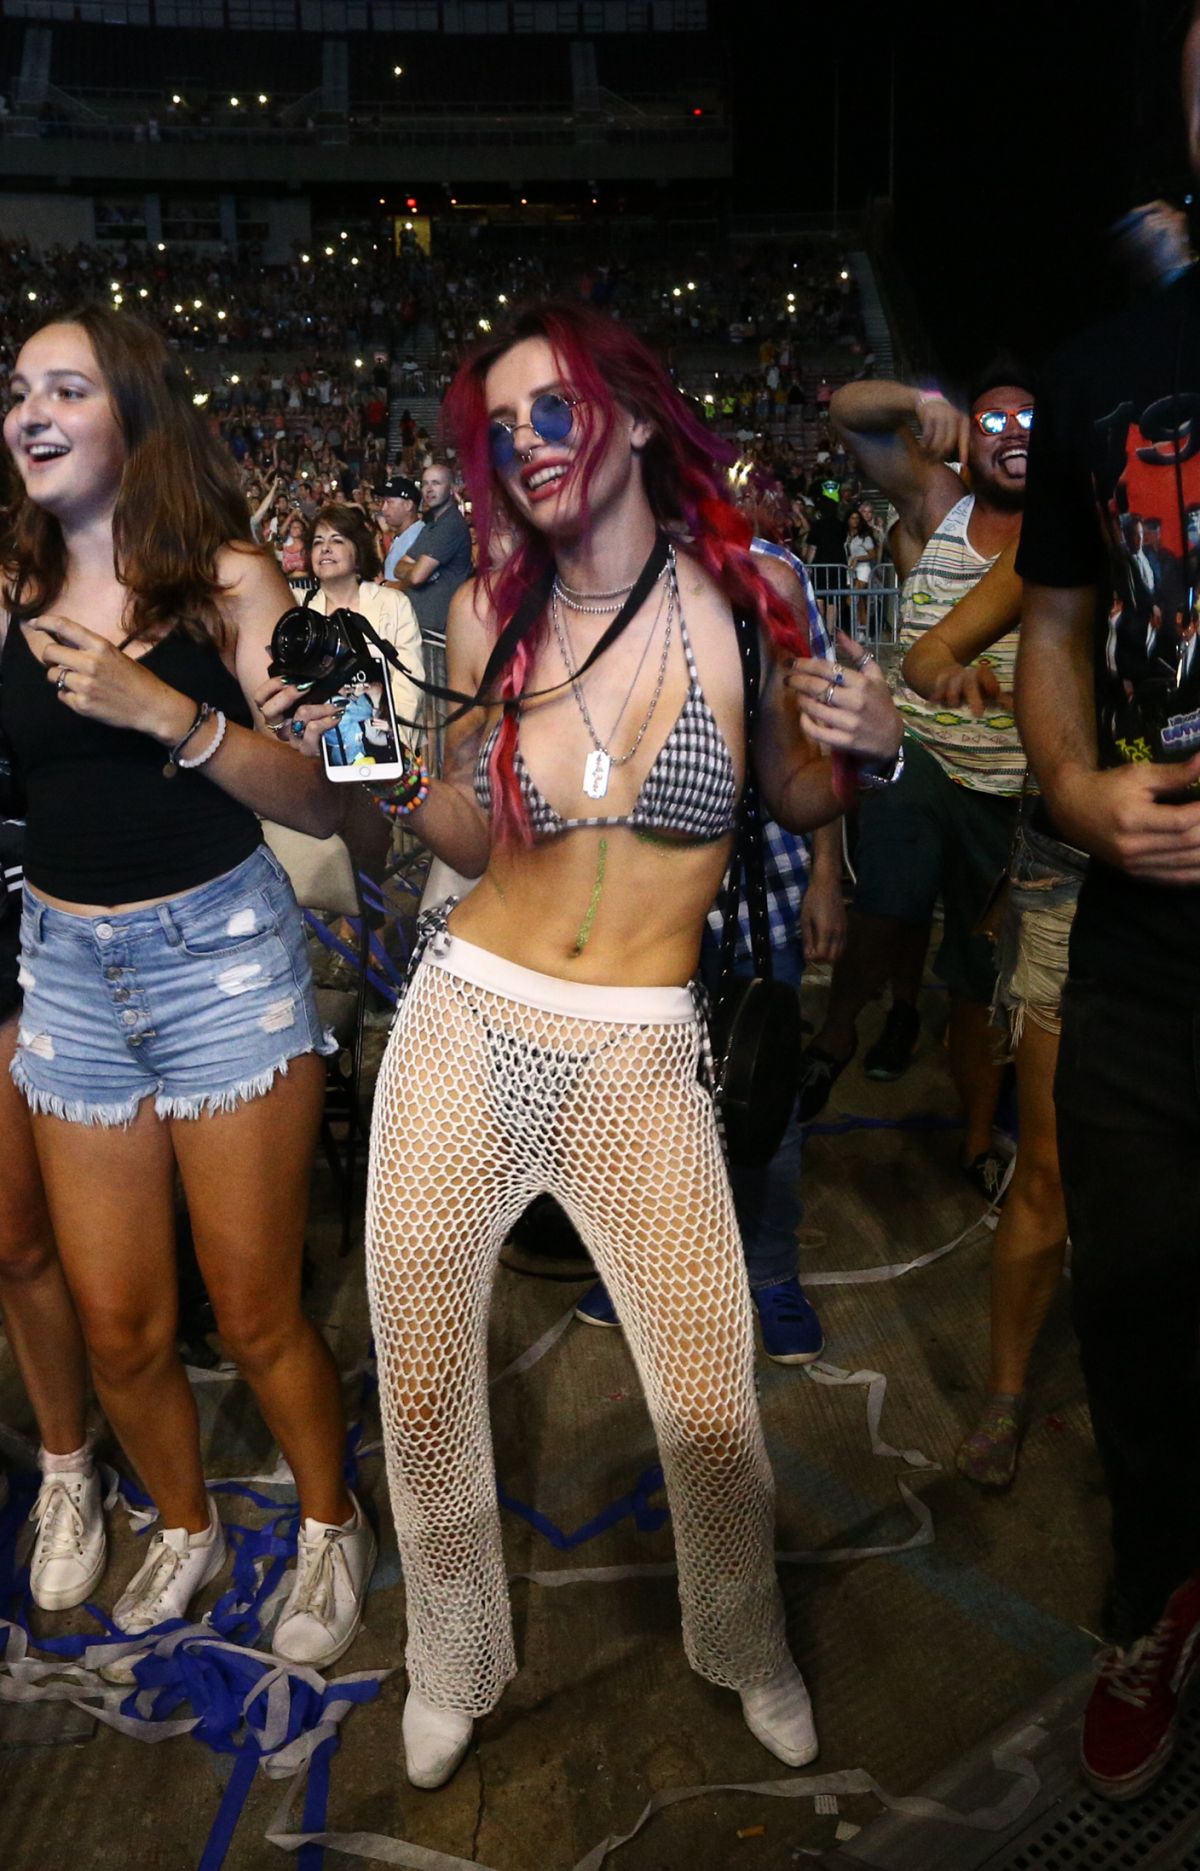 Bella Thorne Dancing In The Crowd At Billboard Hot 100 Festival In New